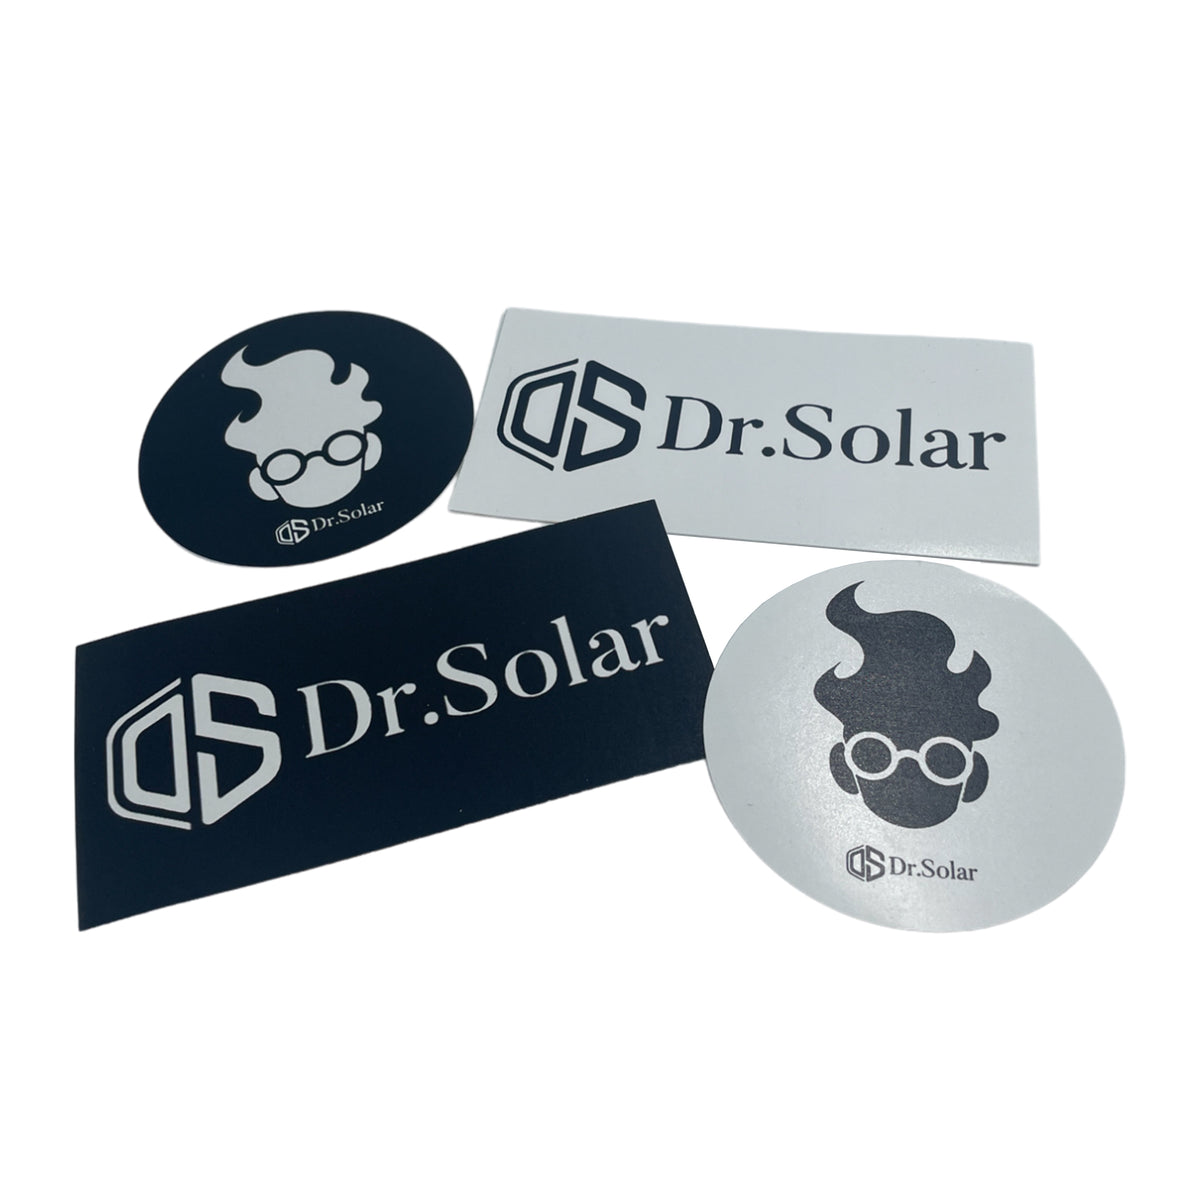 Dr.Solar Mixed Sticker for Laptop, Journal, Notesbook, Phone, Computer, Luggage